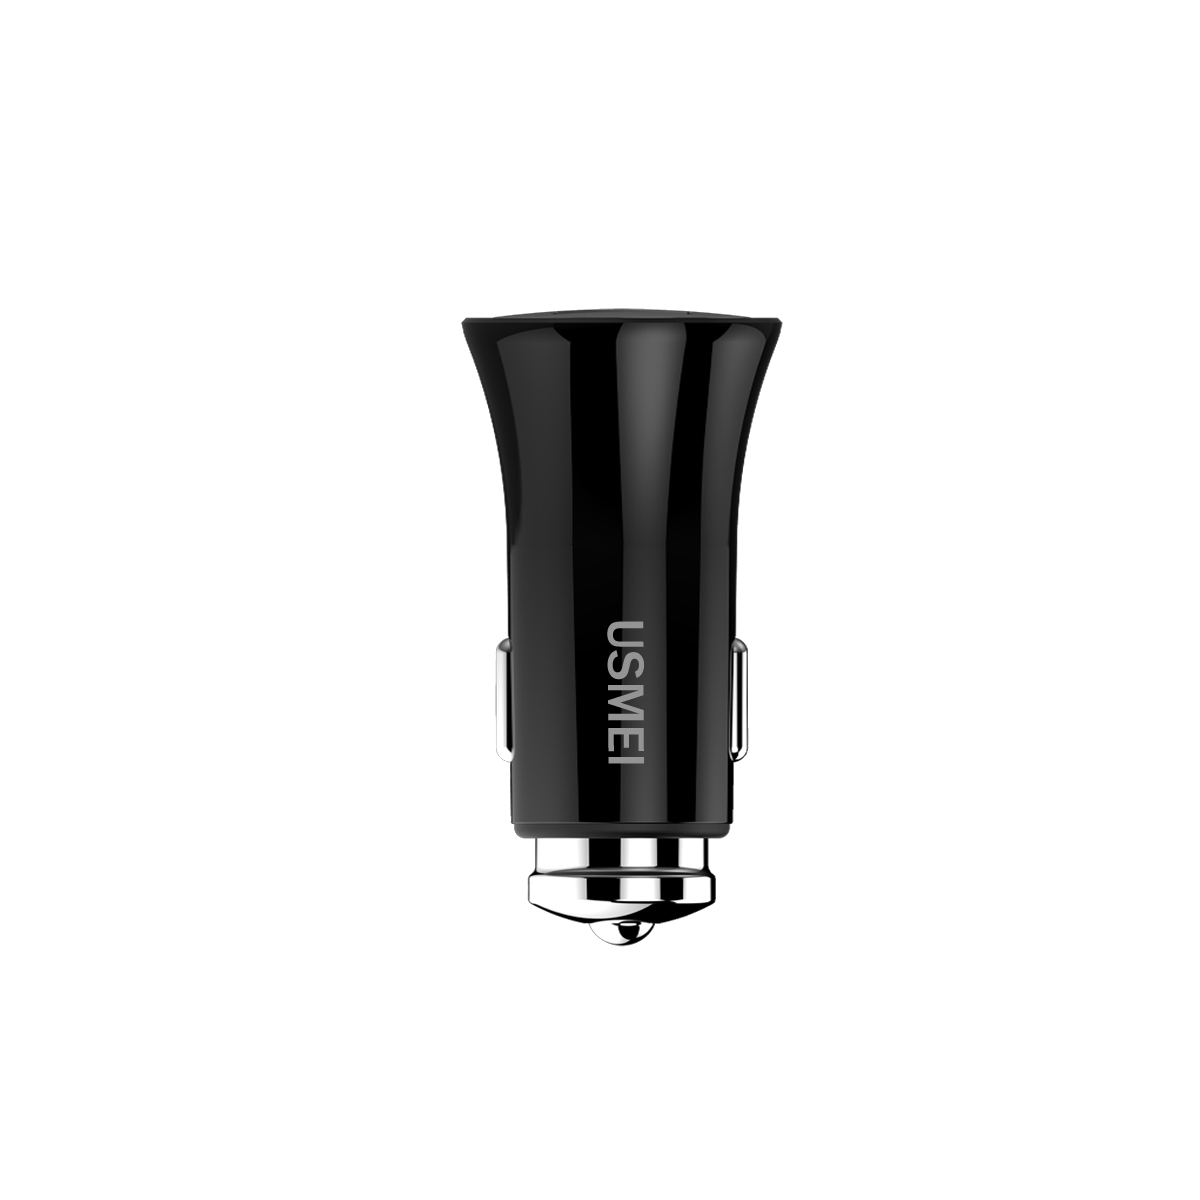 USMEI C8 3.6A Dual USB Car Charger Breathing Light with Voltage and Current LED Display